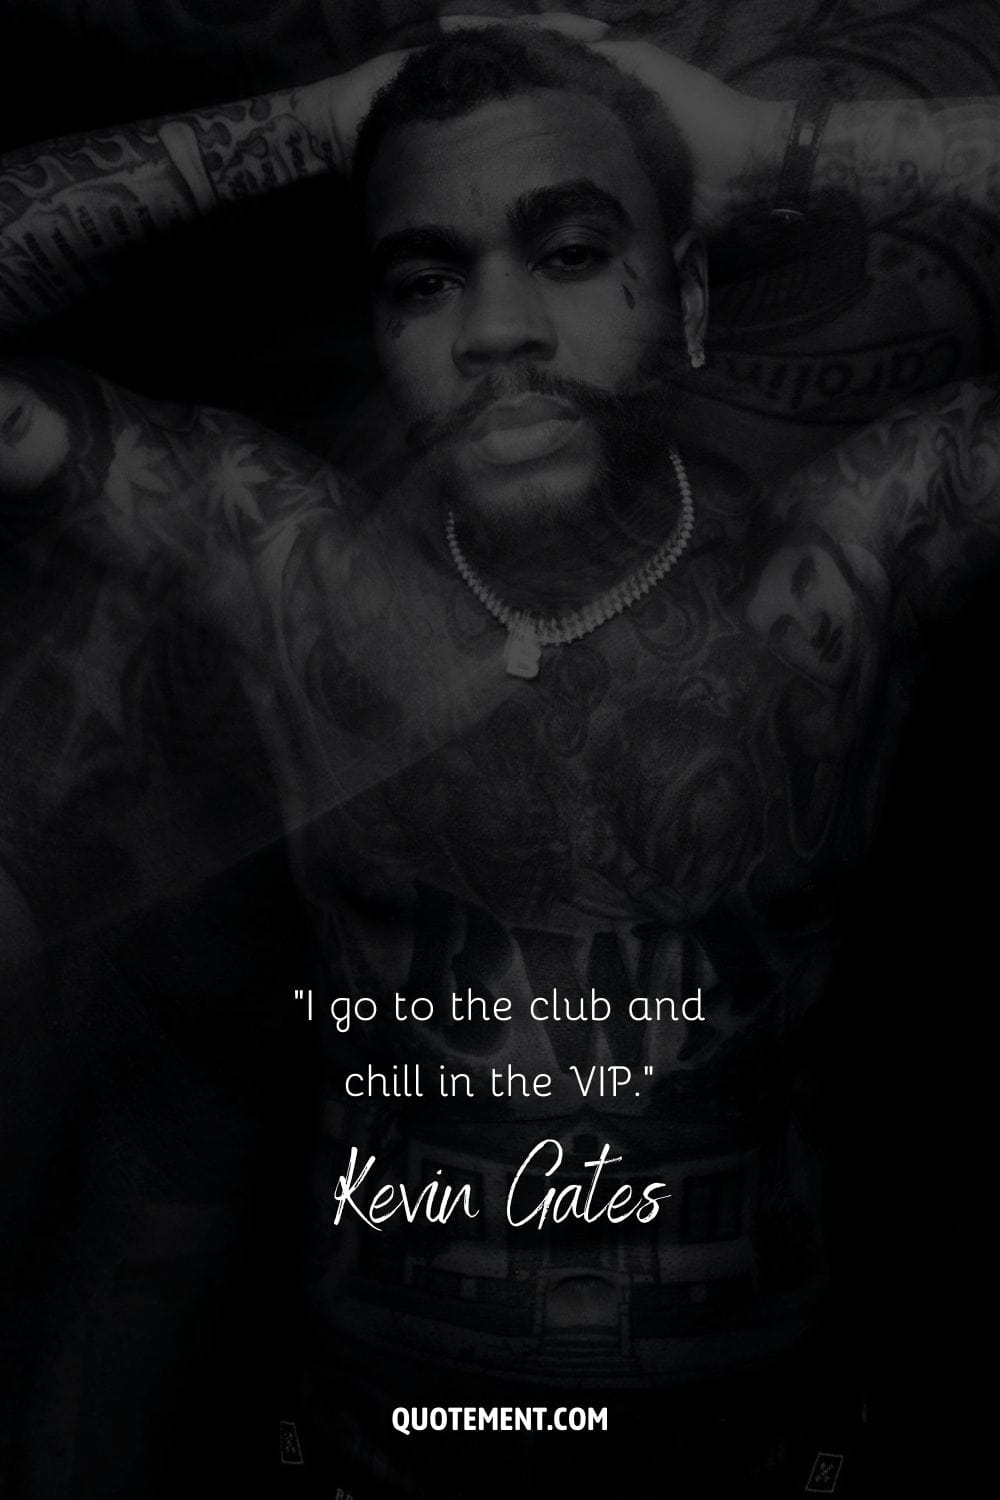 “I go to the club and chill in the VIP.” – Kevin Gates